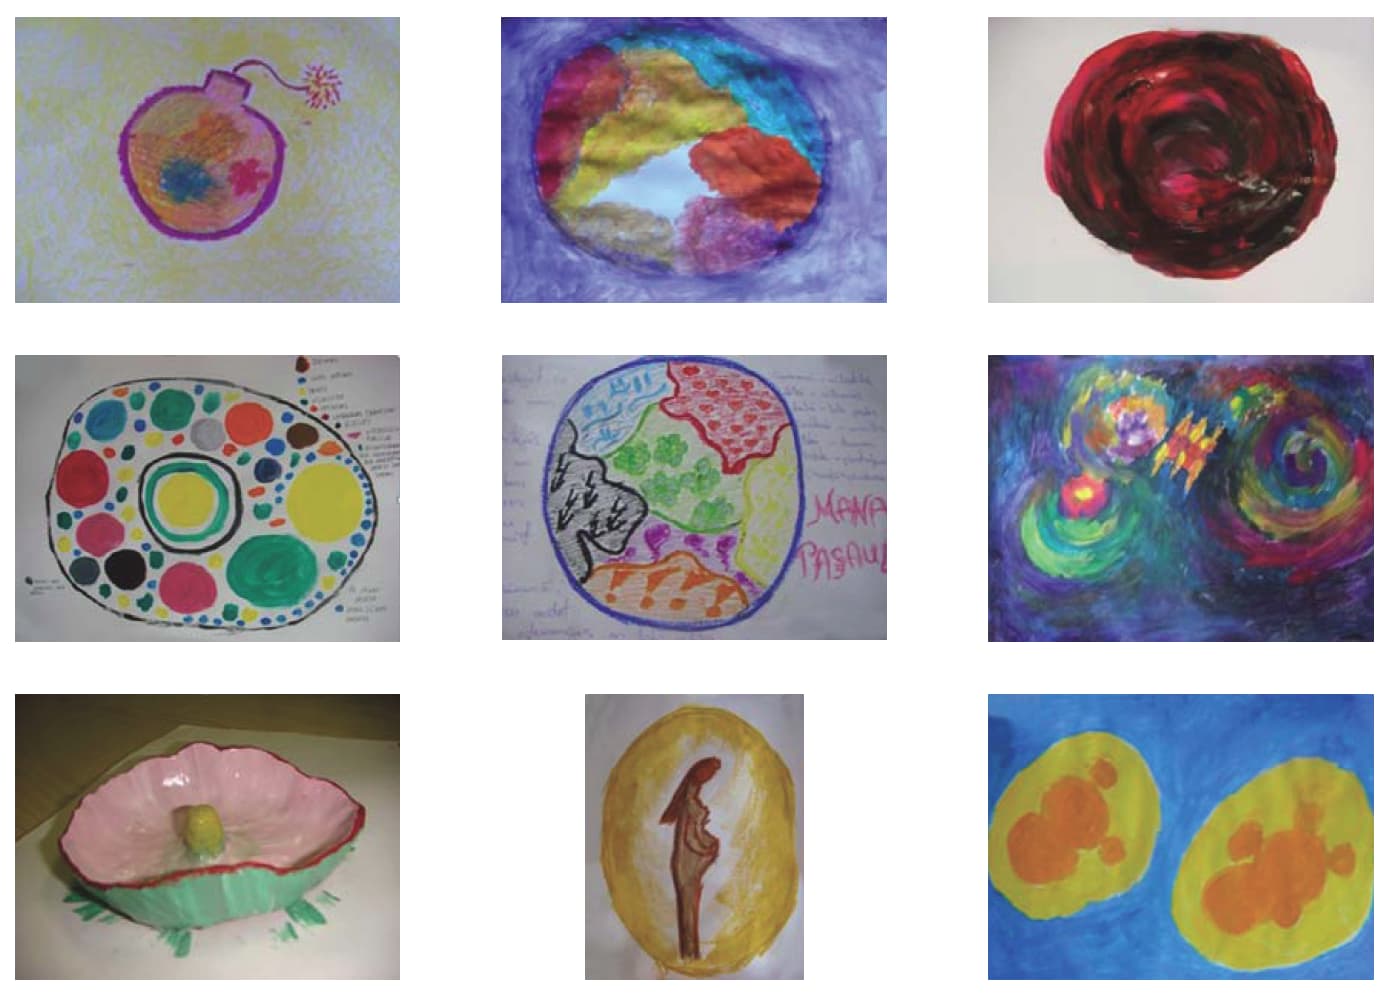 Figure 2. Circle in a circle like a “sparkling symbol” in different pieces of art prepared by pregnant women